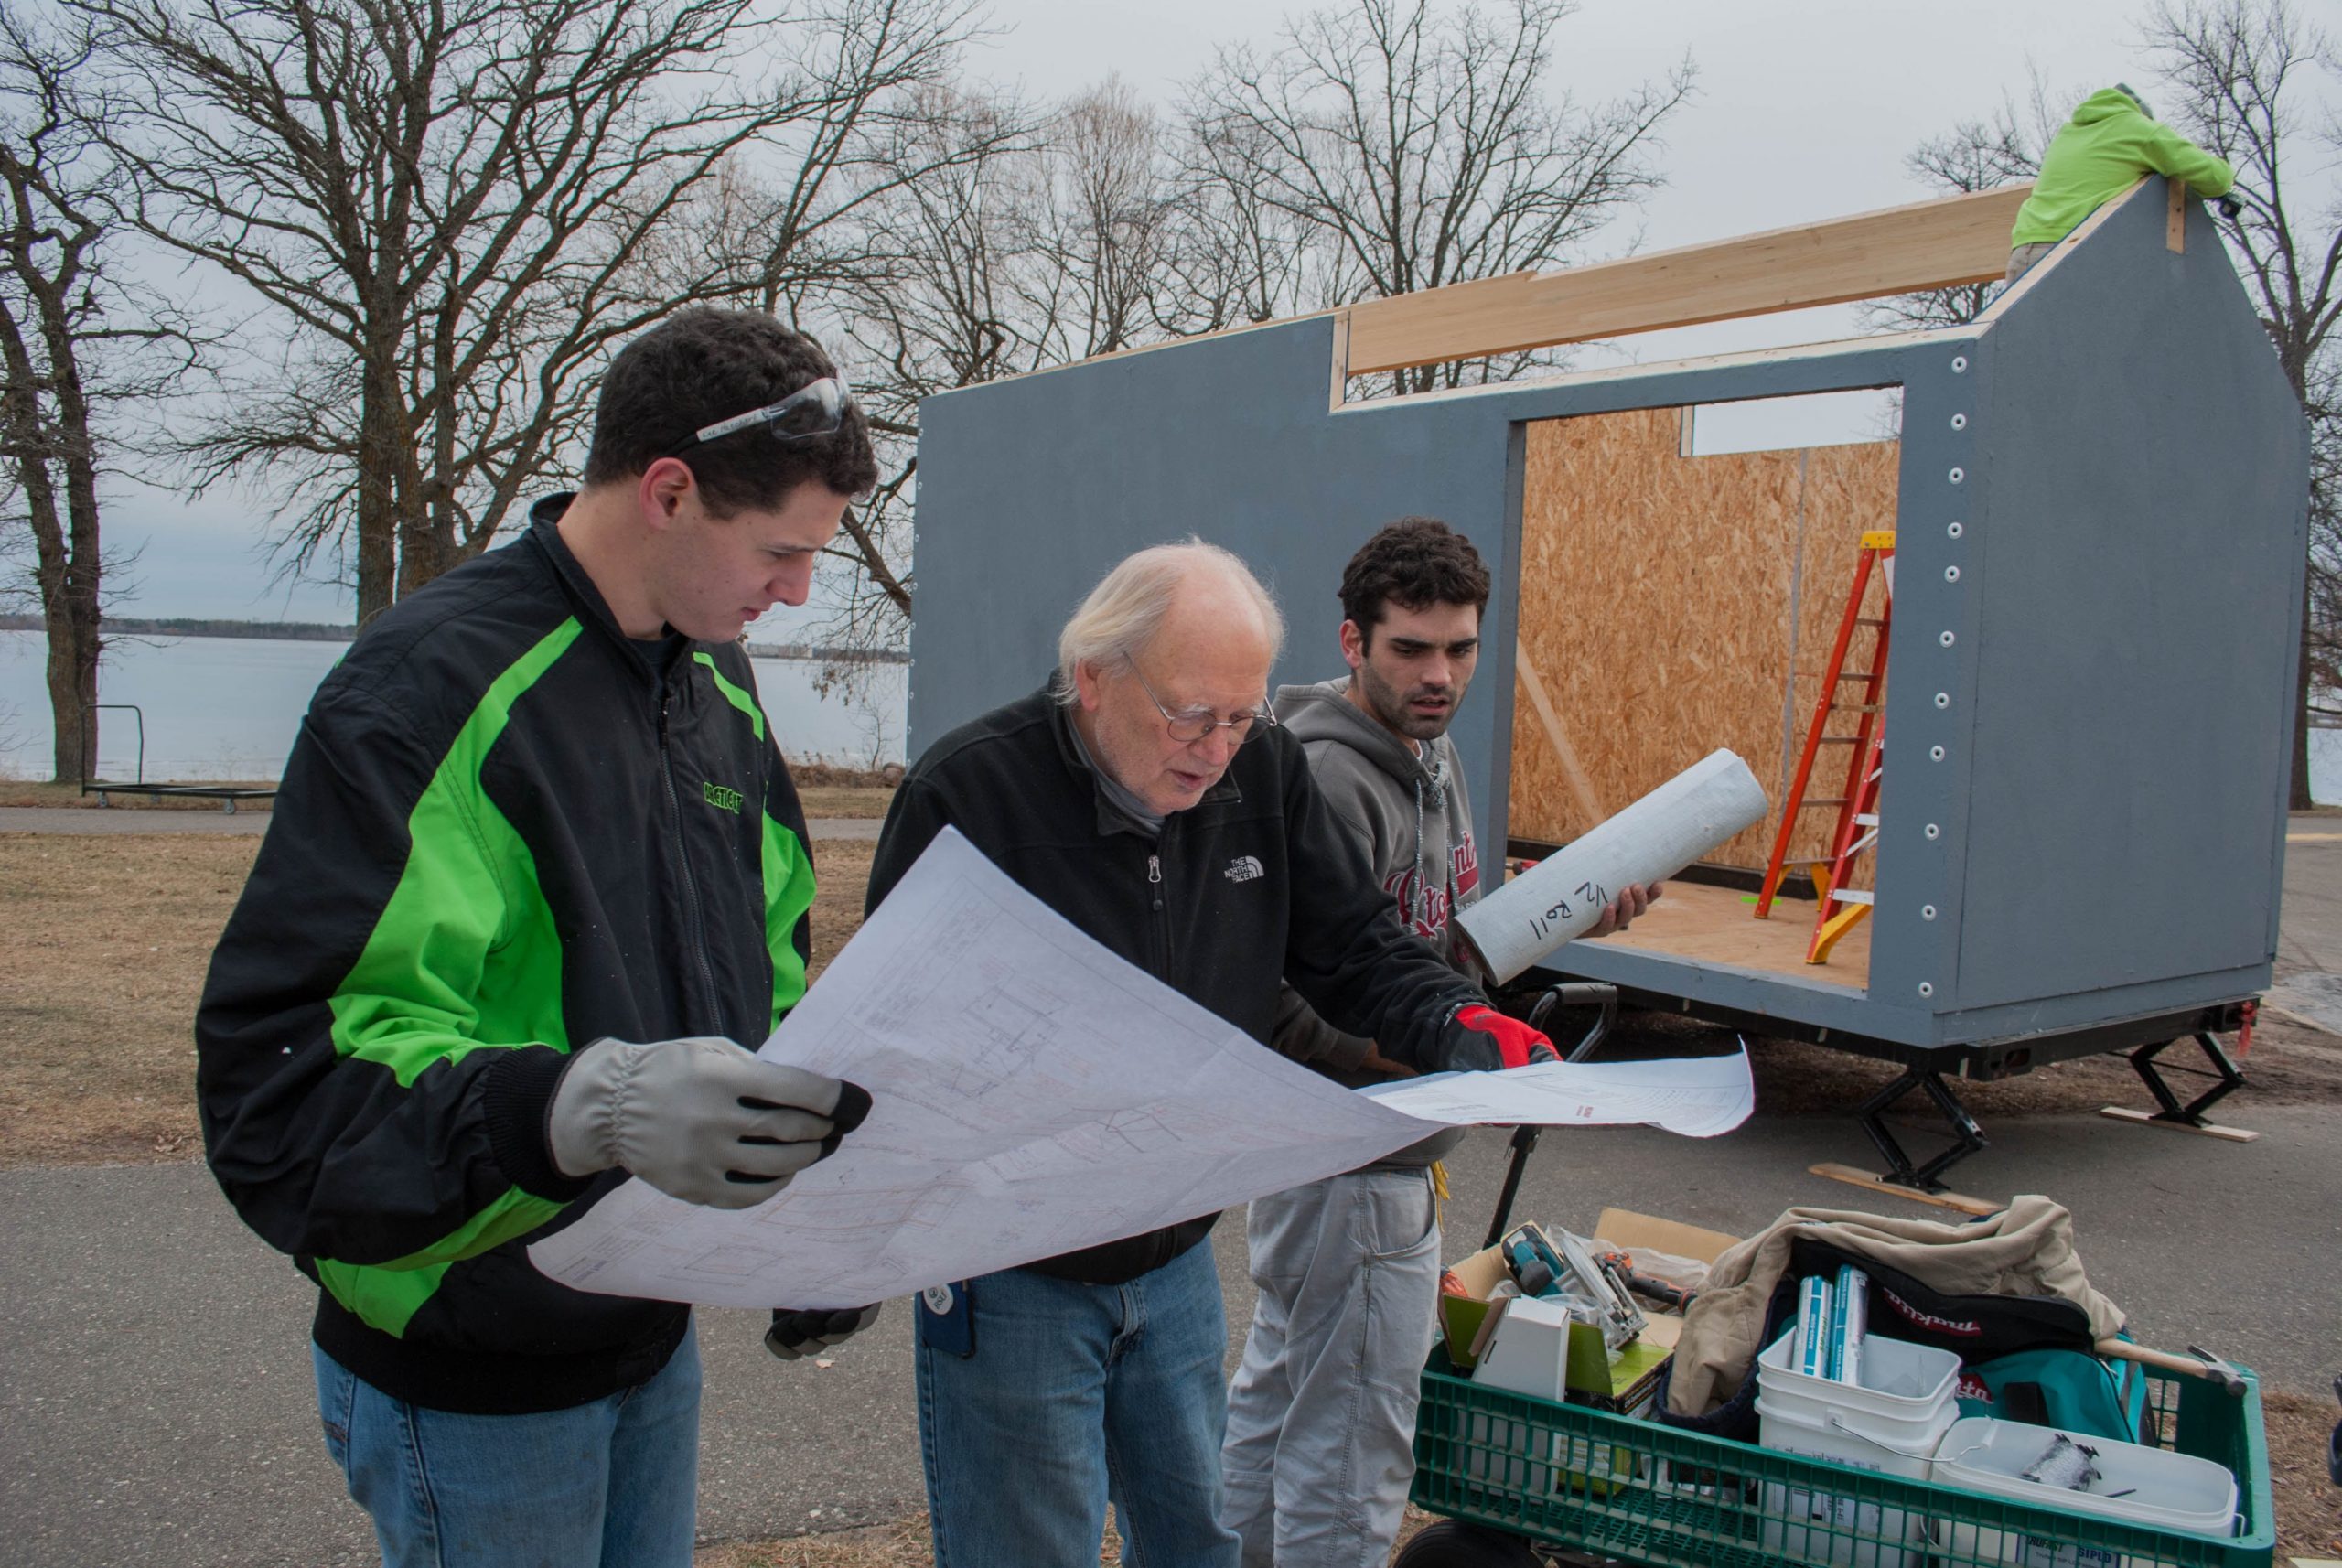 Students looking over plans for a tiny house project with a faculty advisor